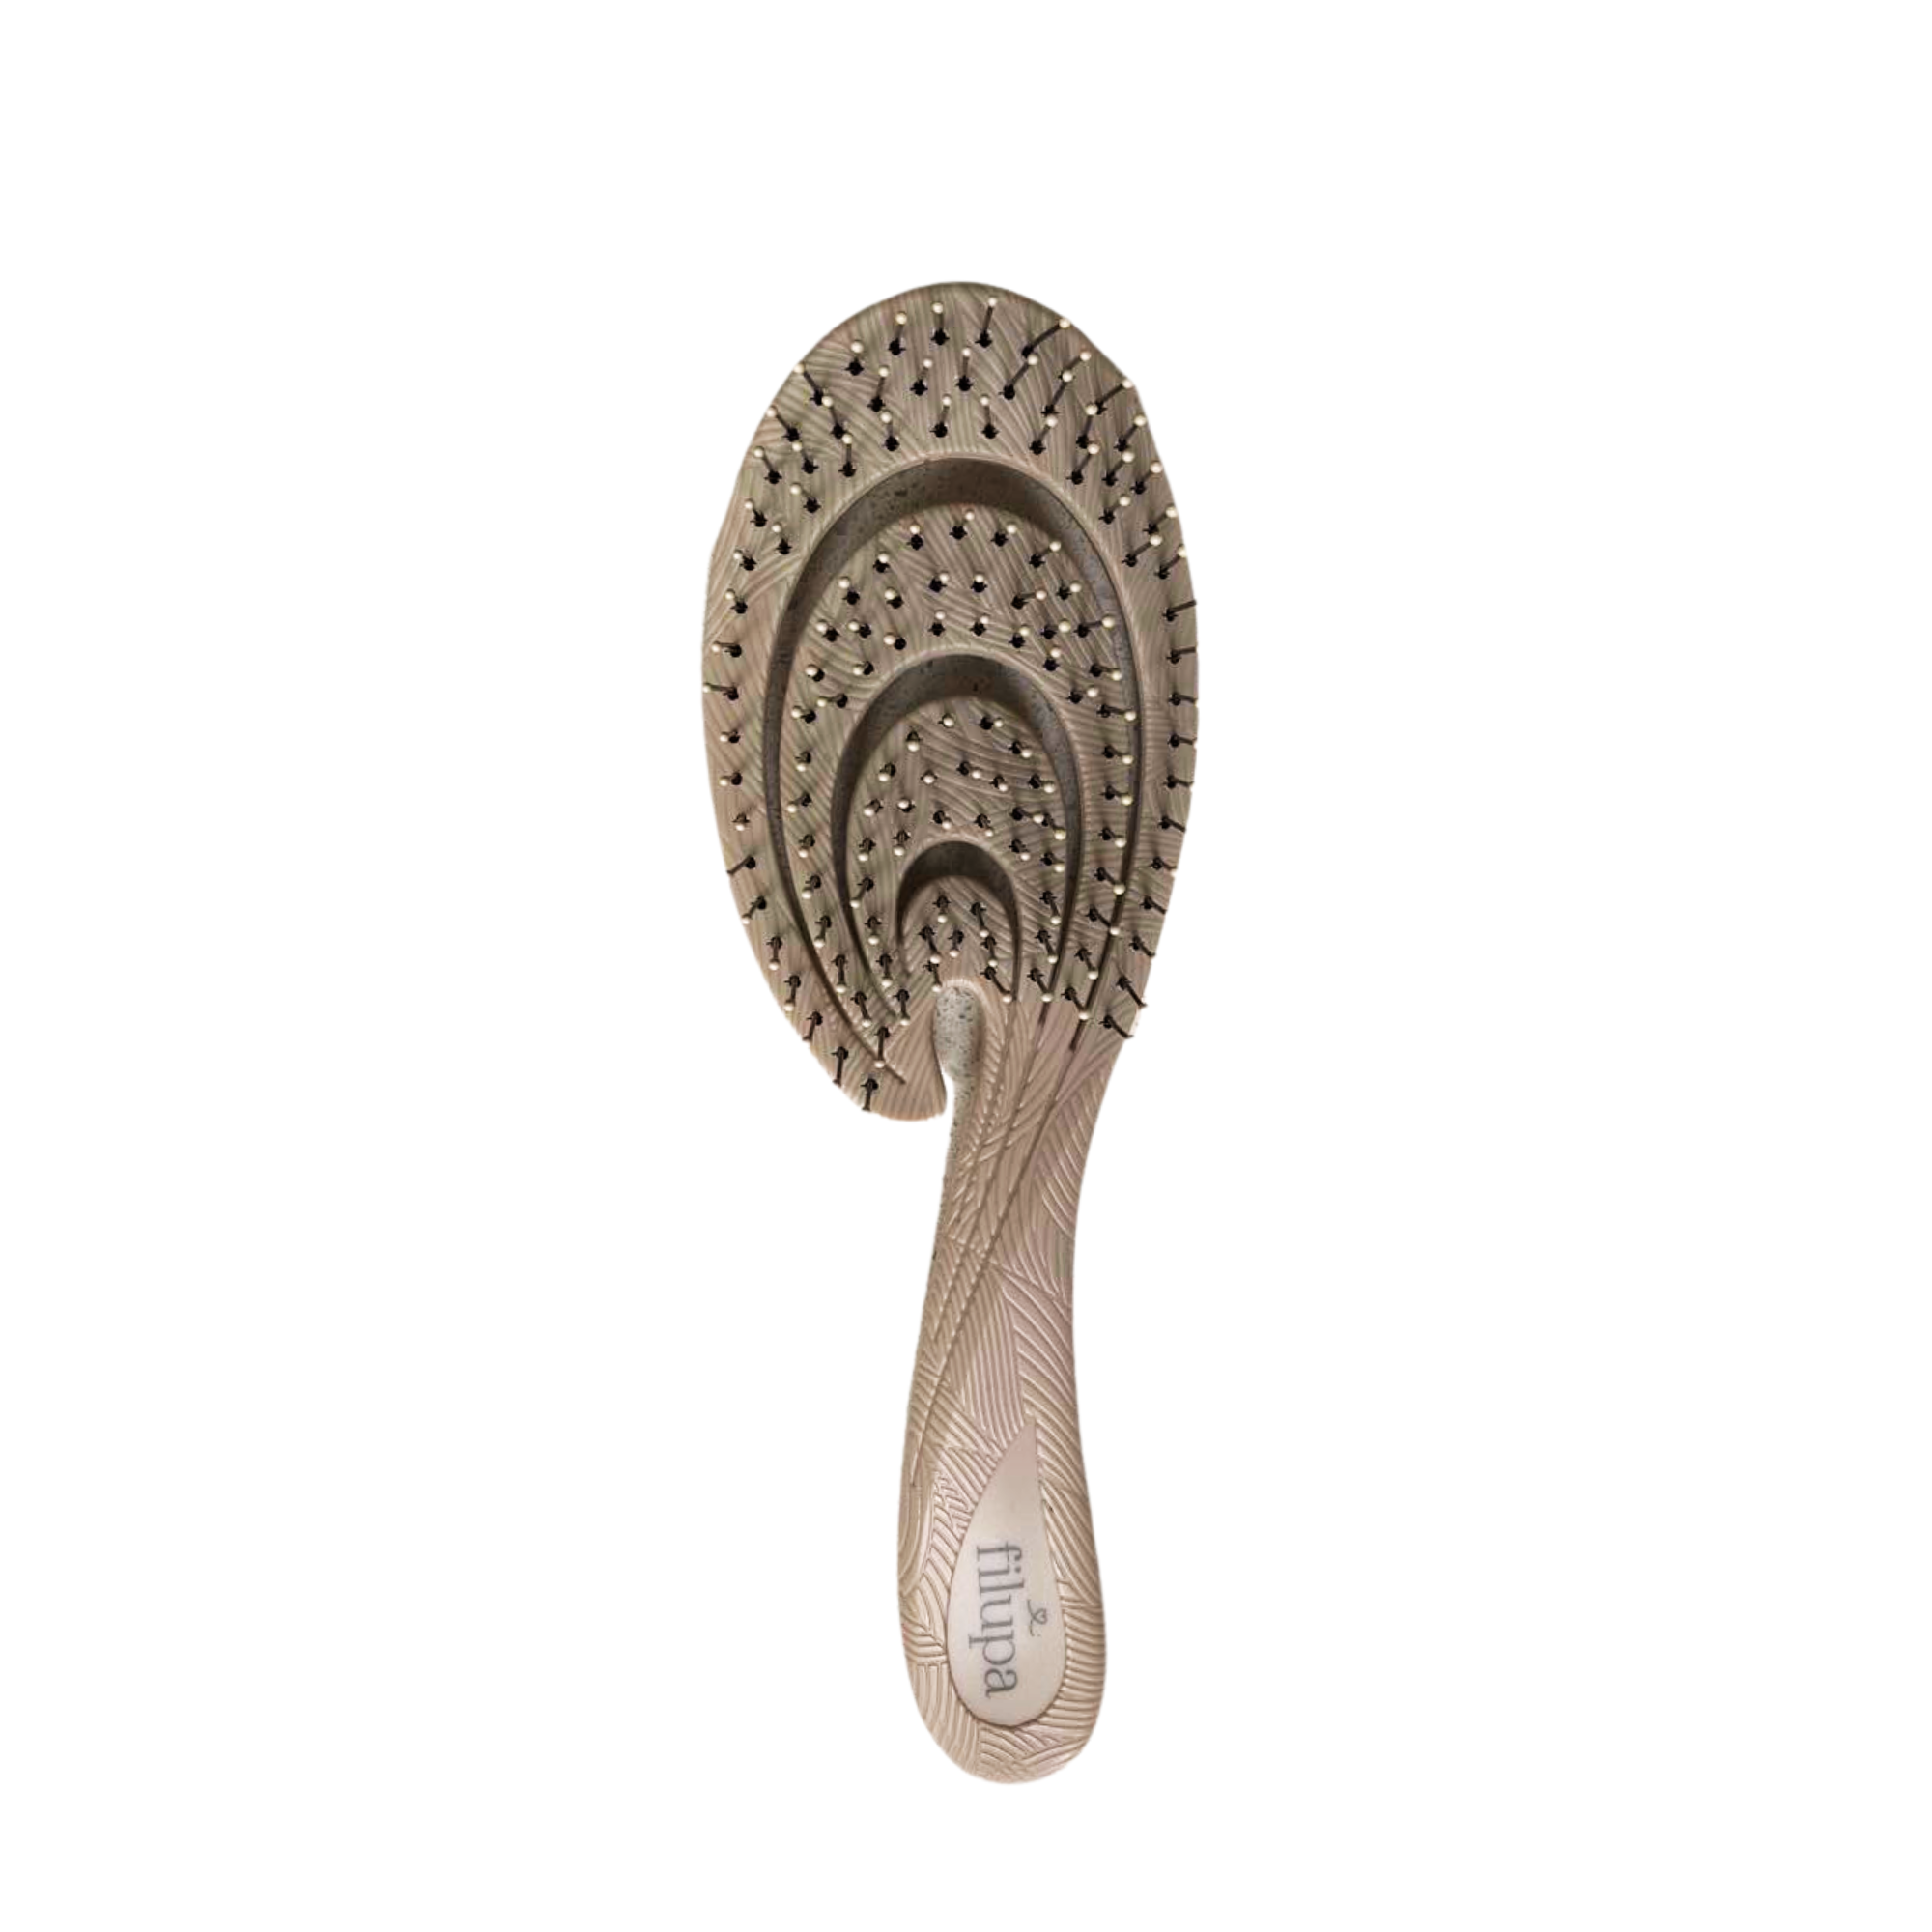 Filupa Tan Brush from Nordic Bio Brush is 100% recyclable. The brush won't pull on your hair and smoothes the finer hair with ease.